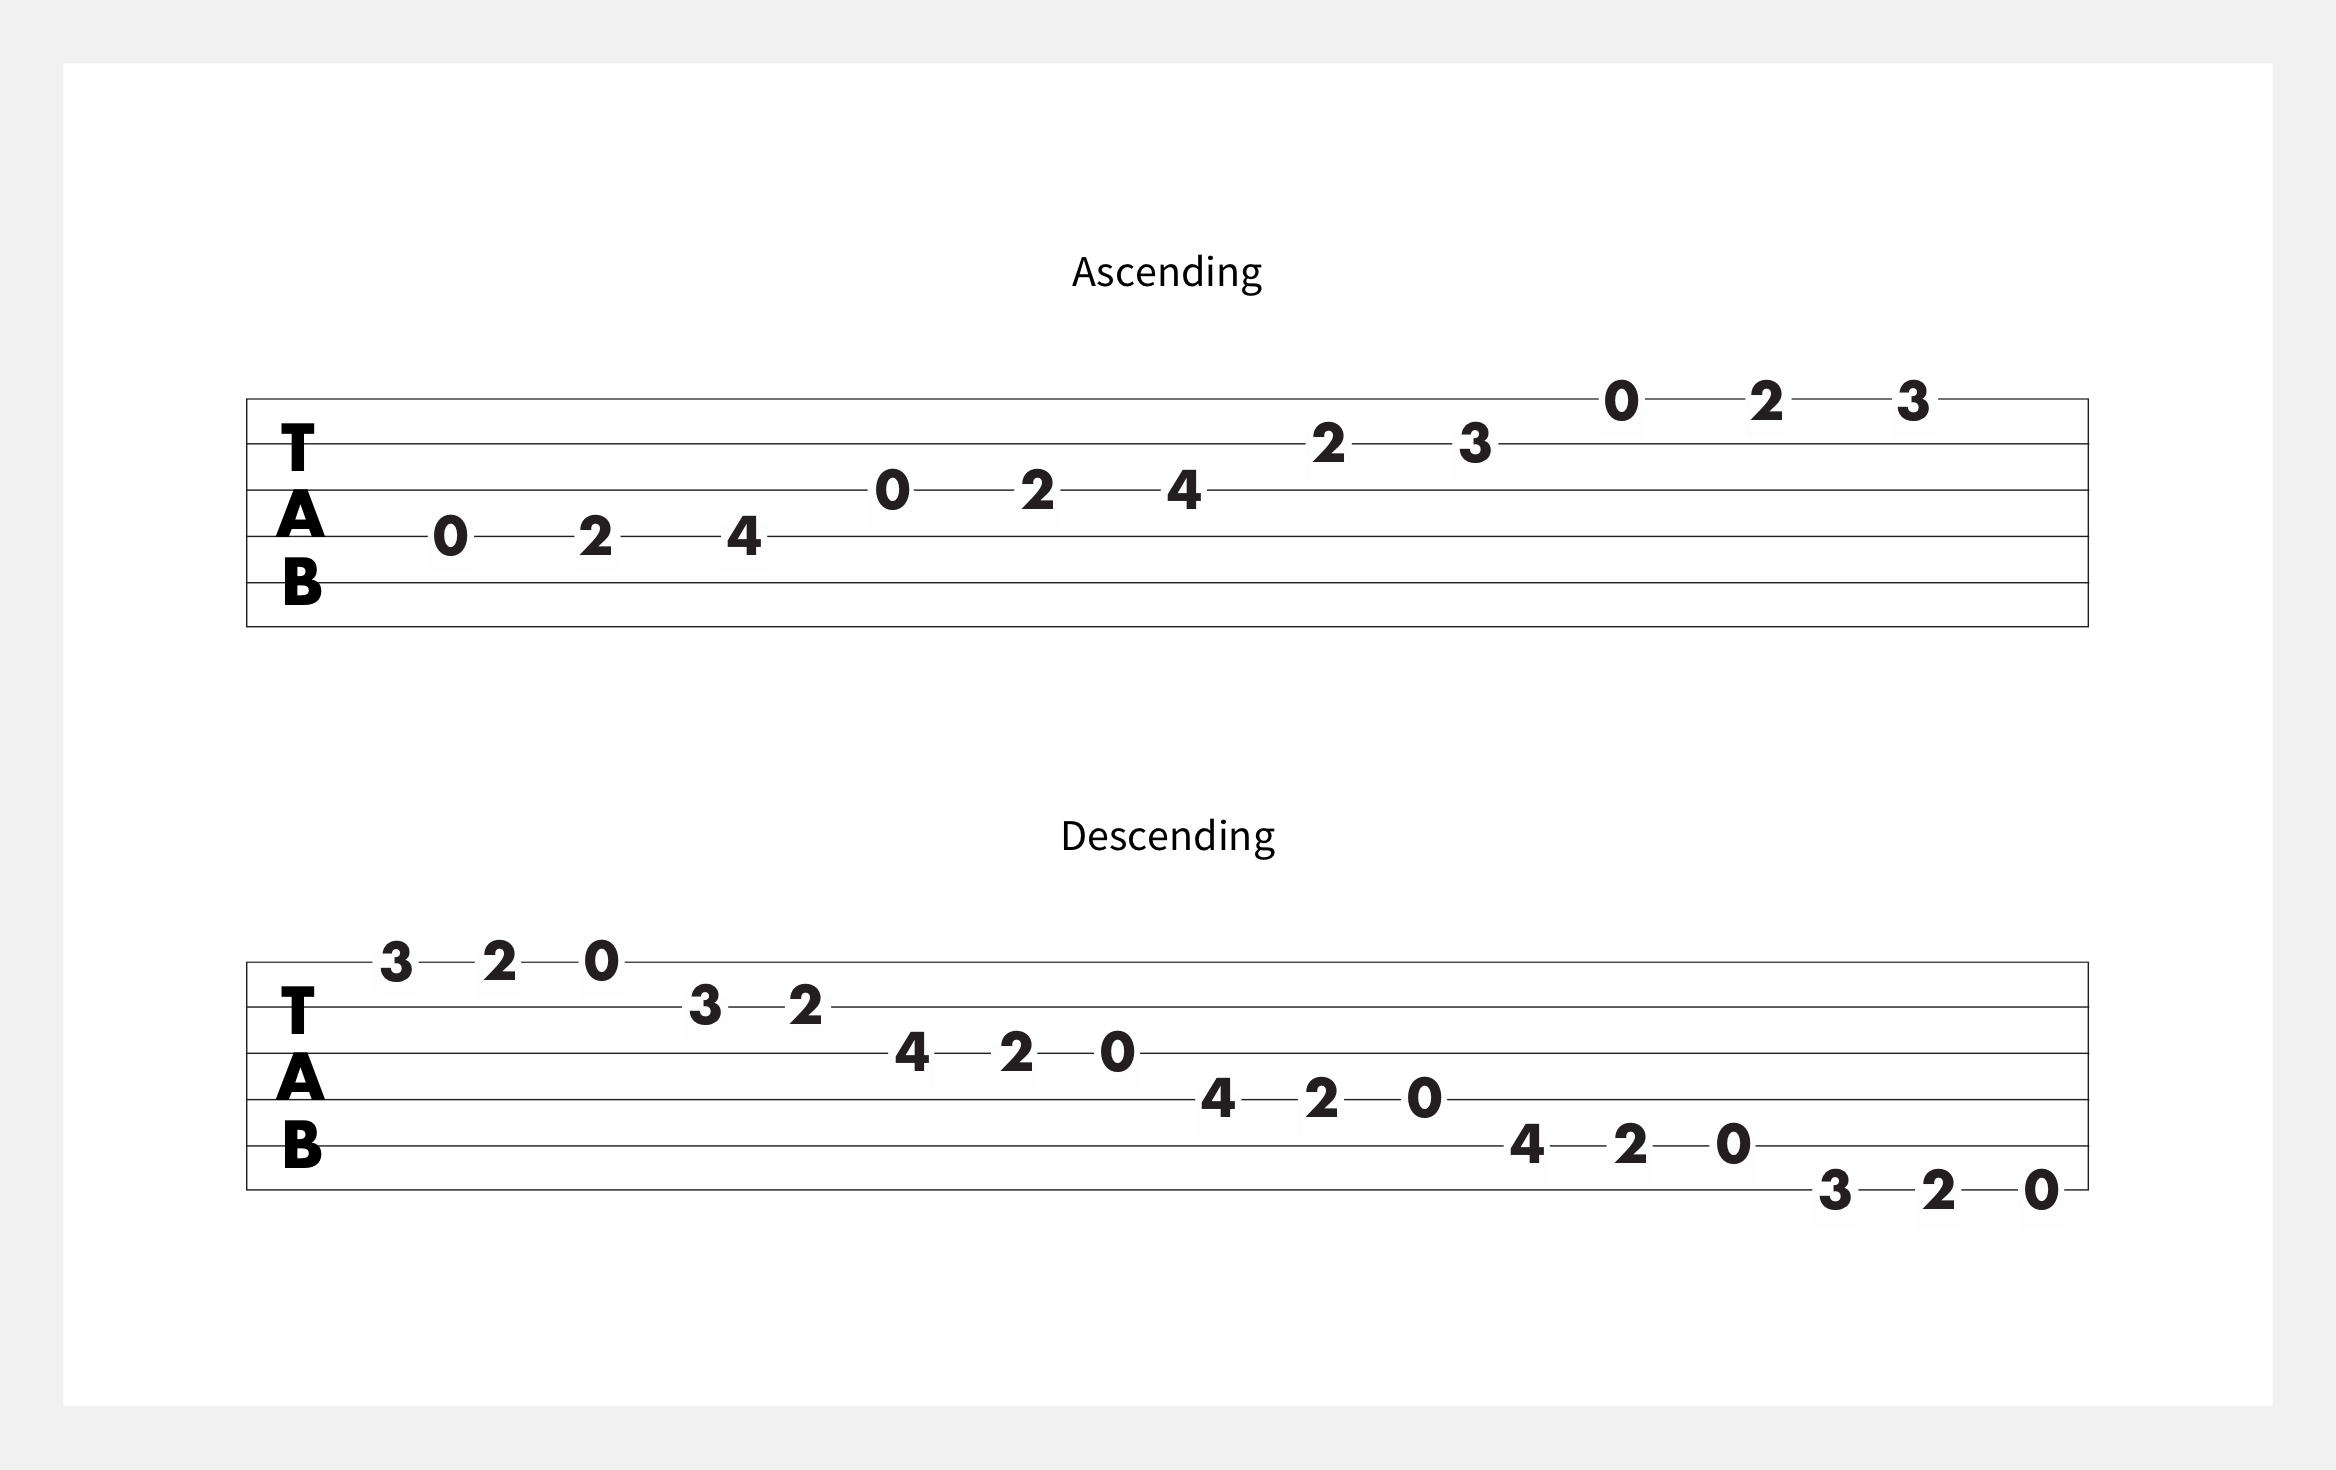 subdominant in the scale of d-flat major.